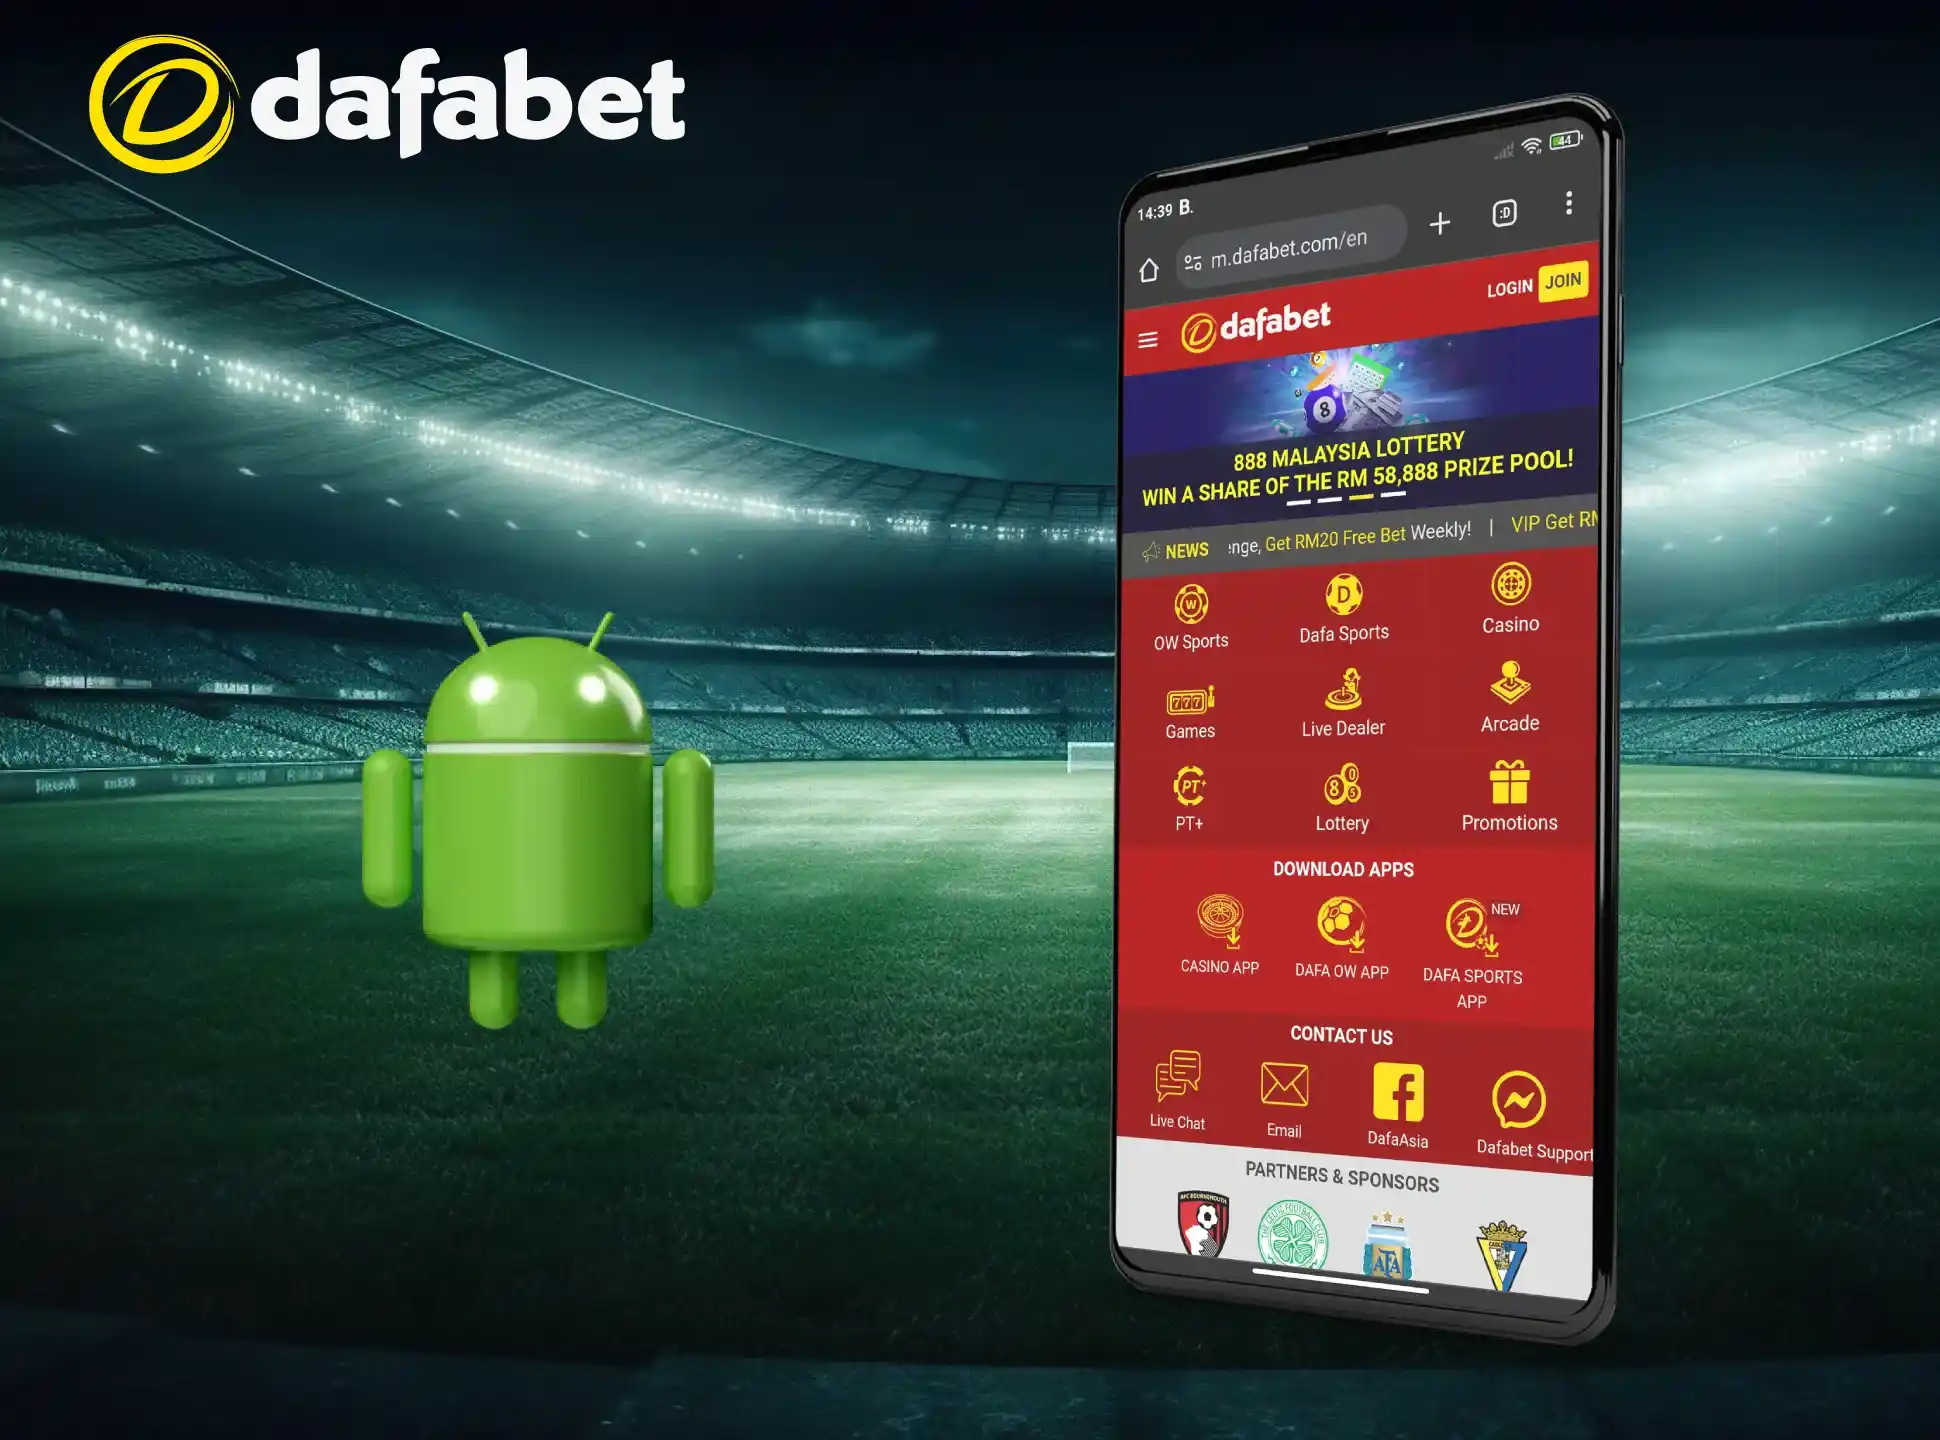 Open the official Dafabet website on your phone.